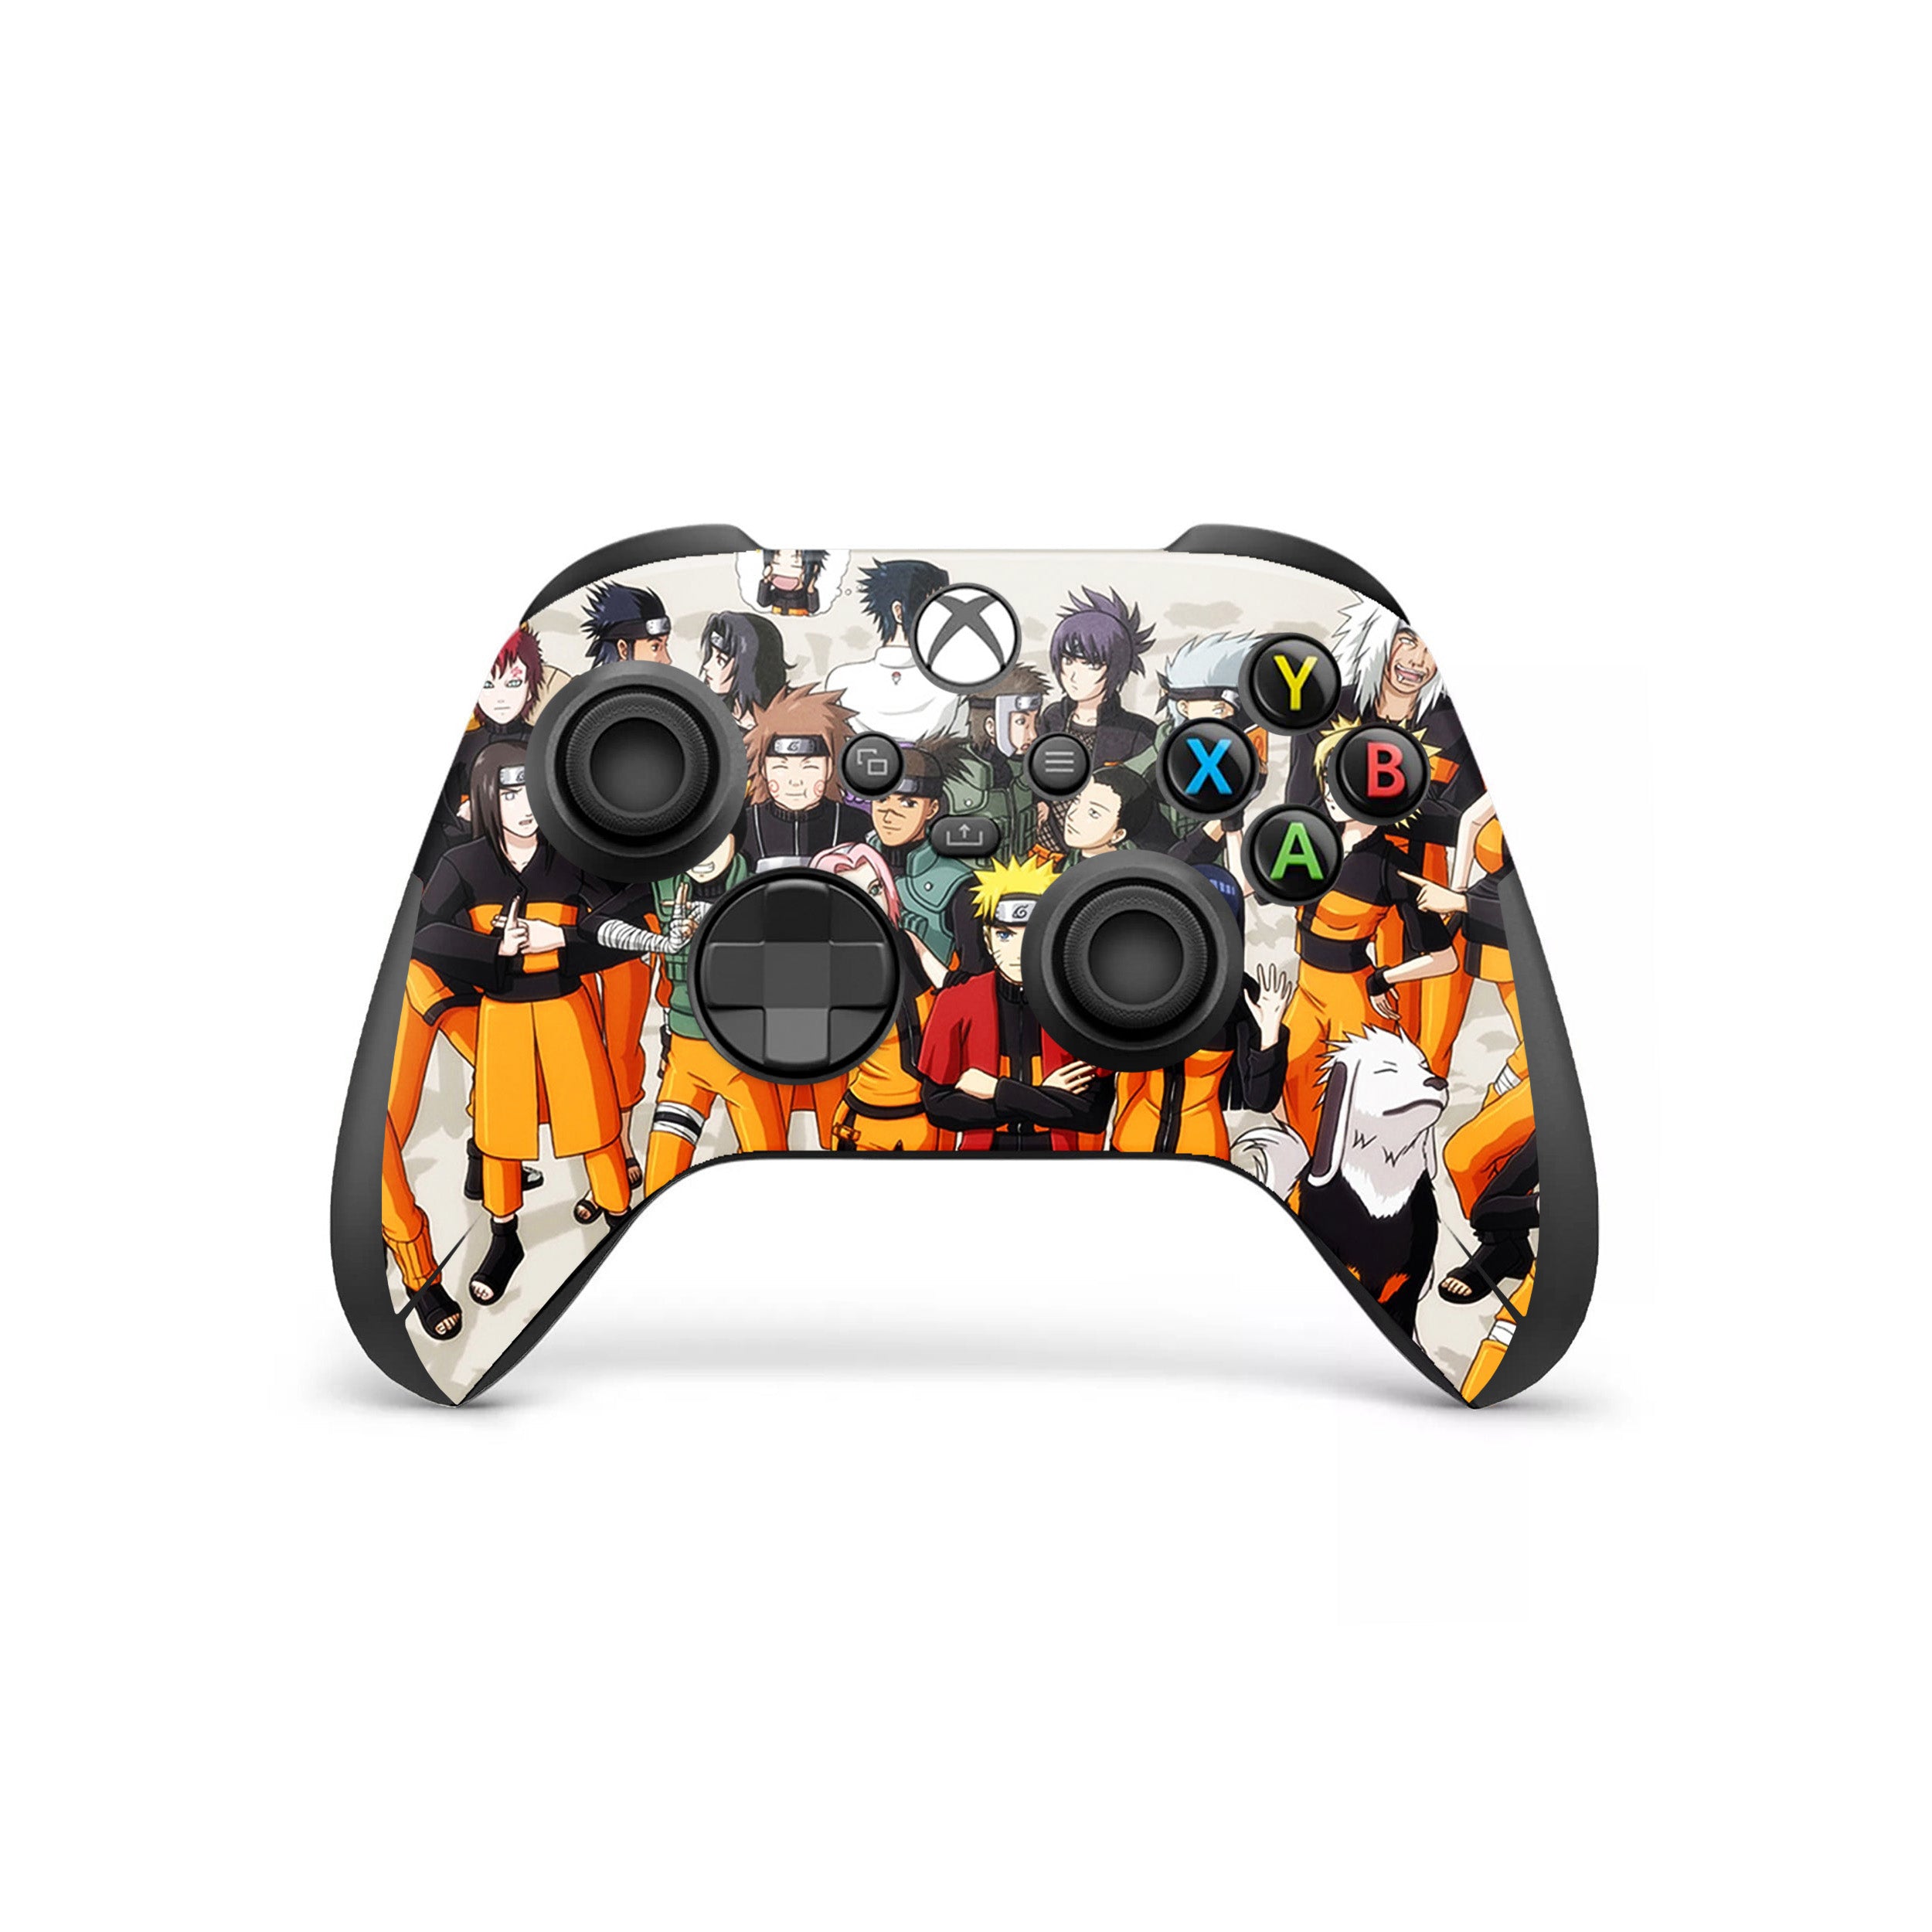 A video game skin featuring a Naruto Squad design for the Xbox Wireless Controller.